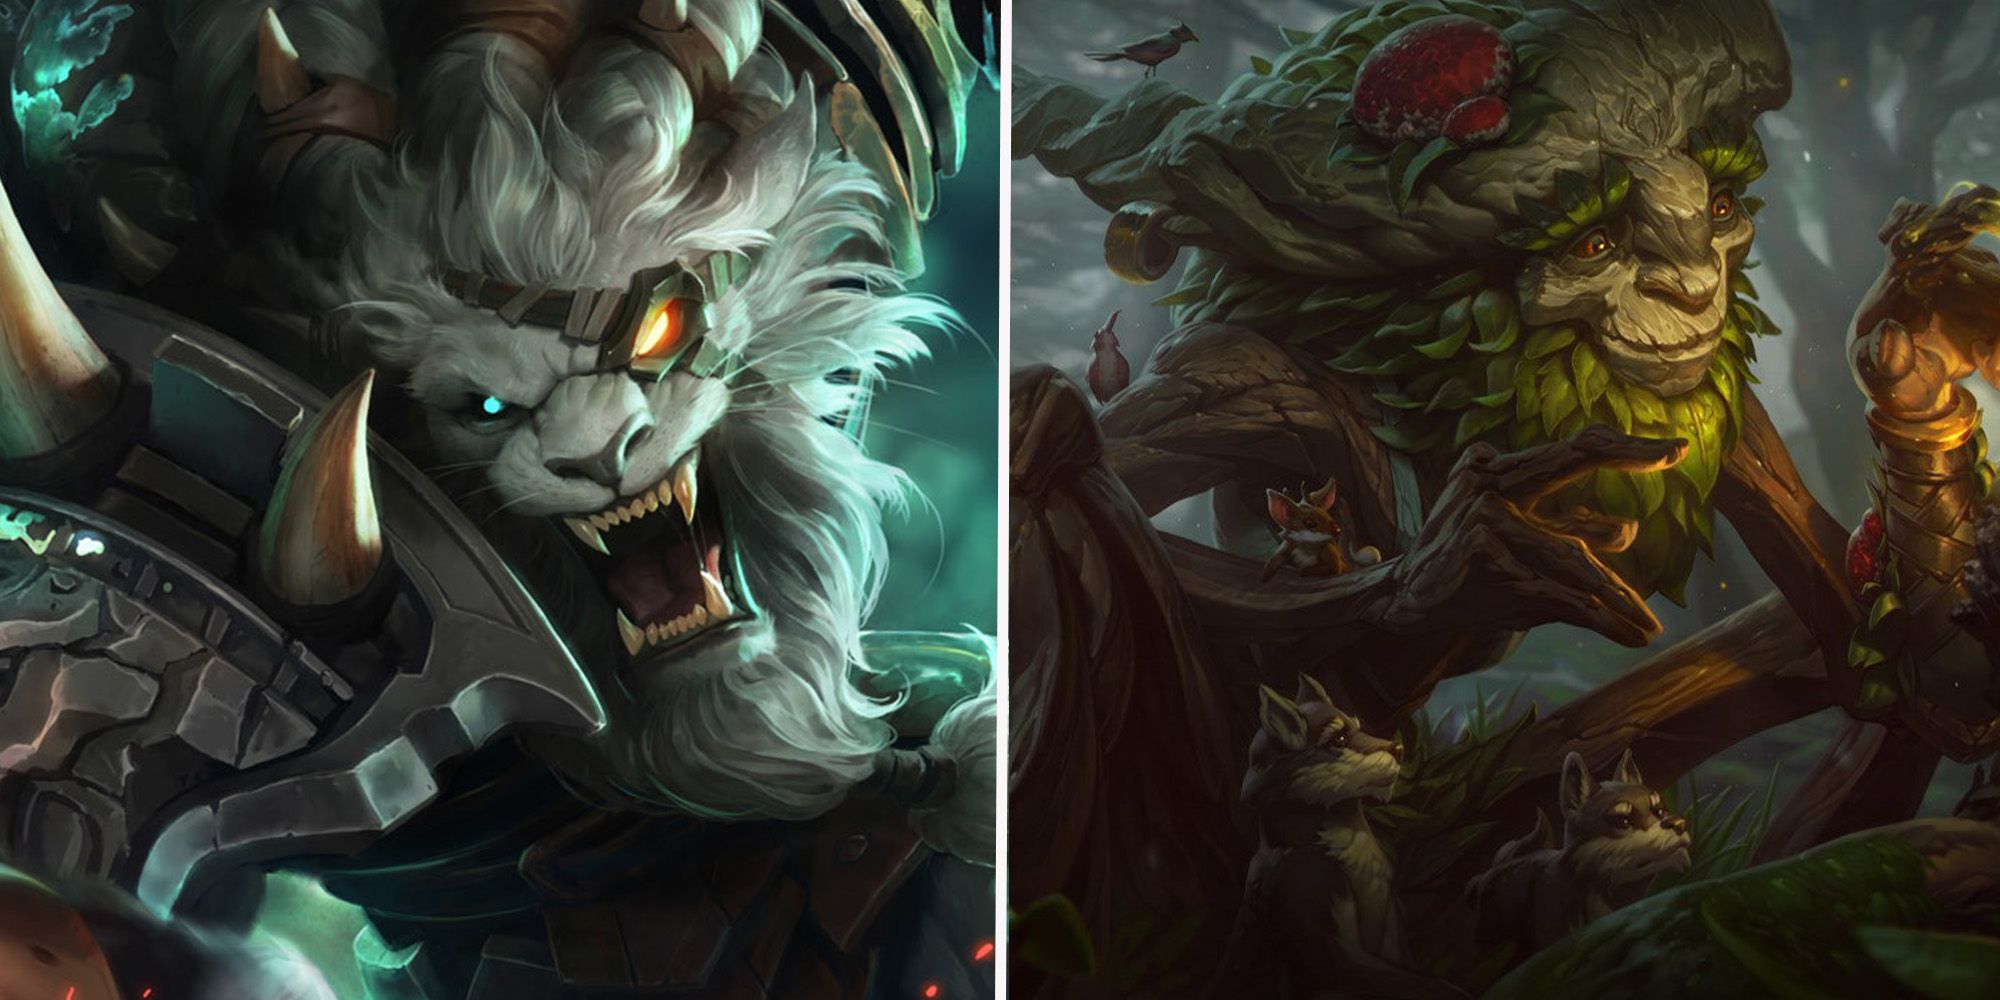 Rengar and Ivern from League of Legends